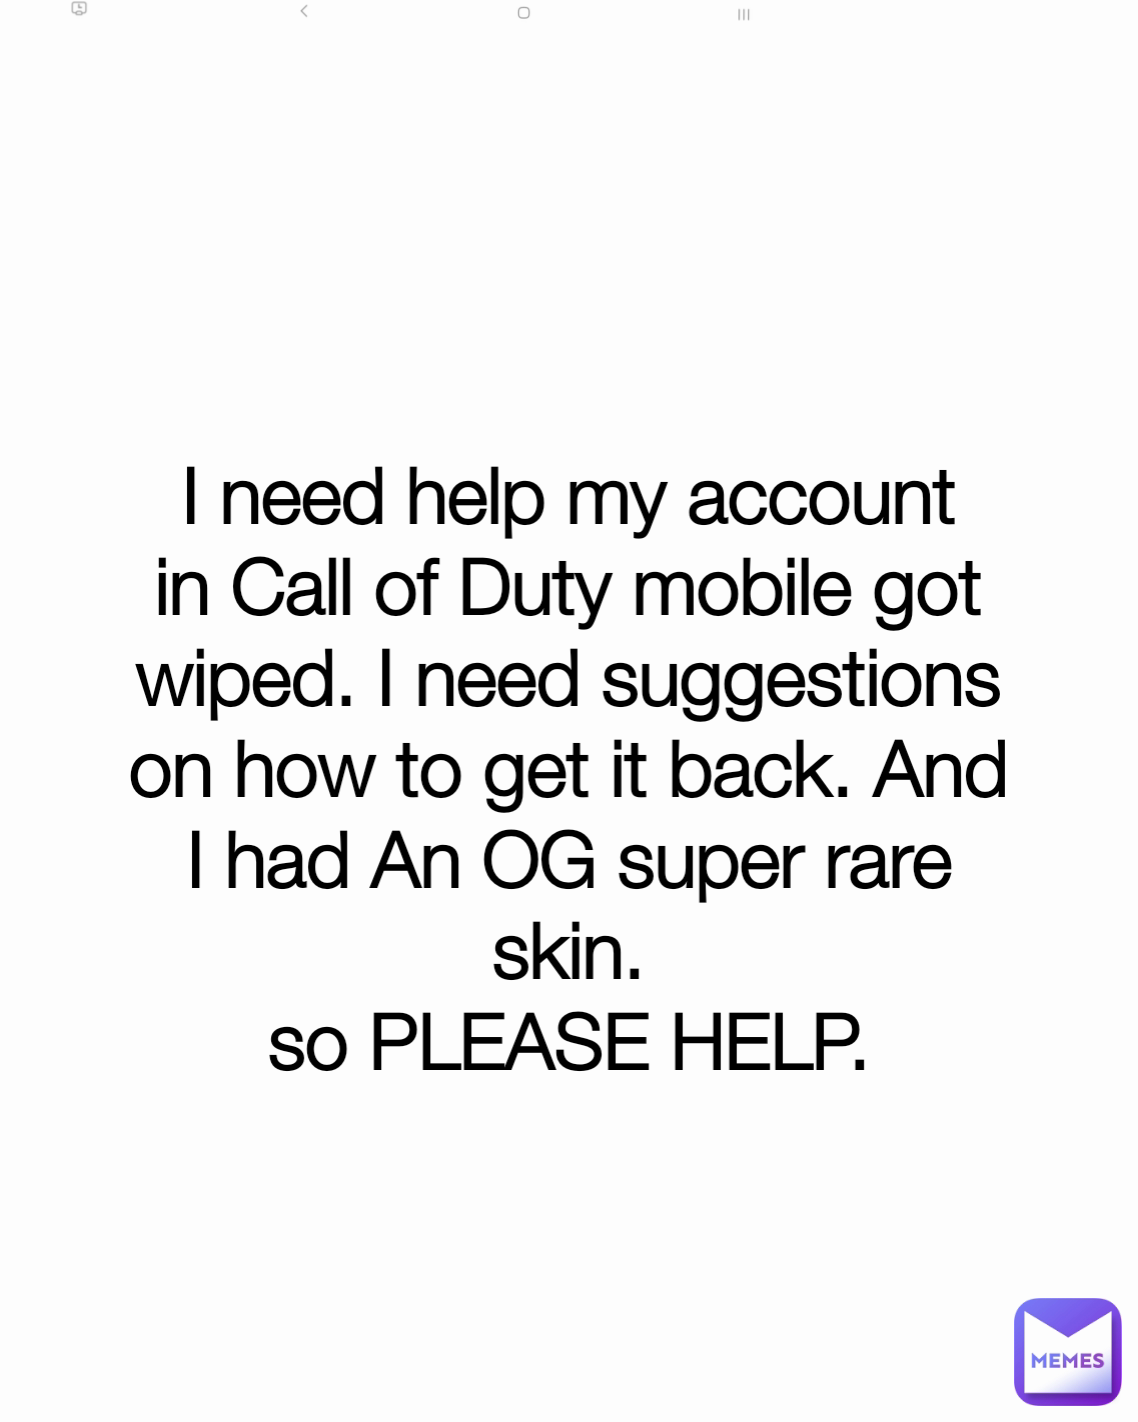 I need help my account in Call of Duty mobile got wiped. I need suggestions on how to get it back. And I had An OG super rare skin.
so PLEASE HELP.